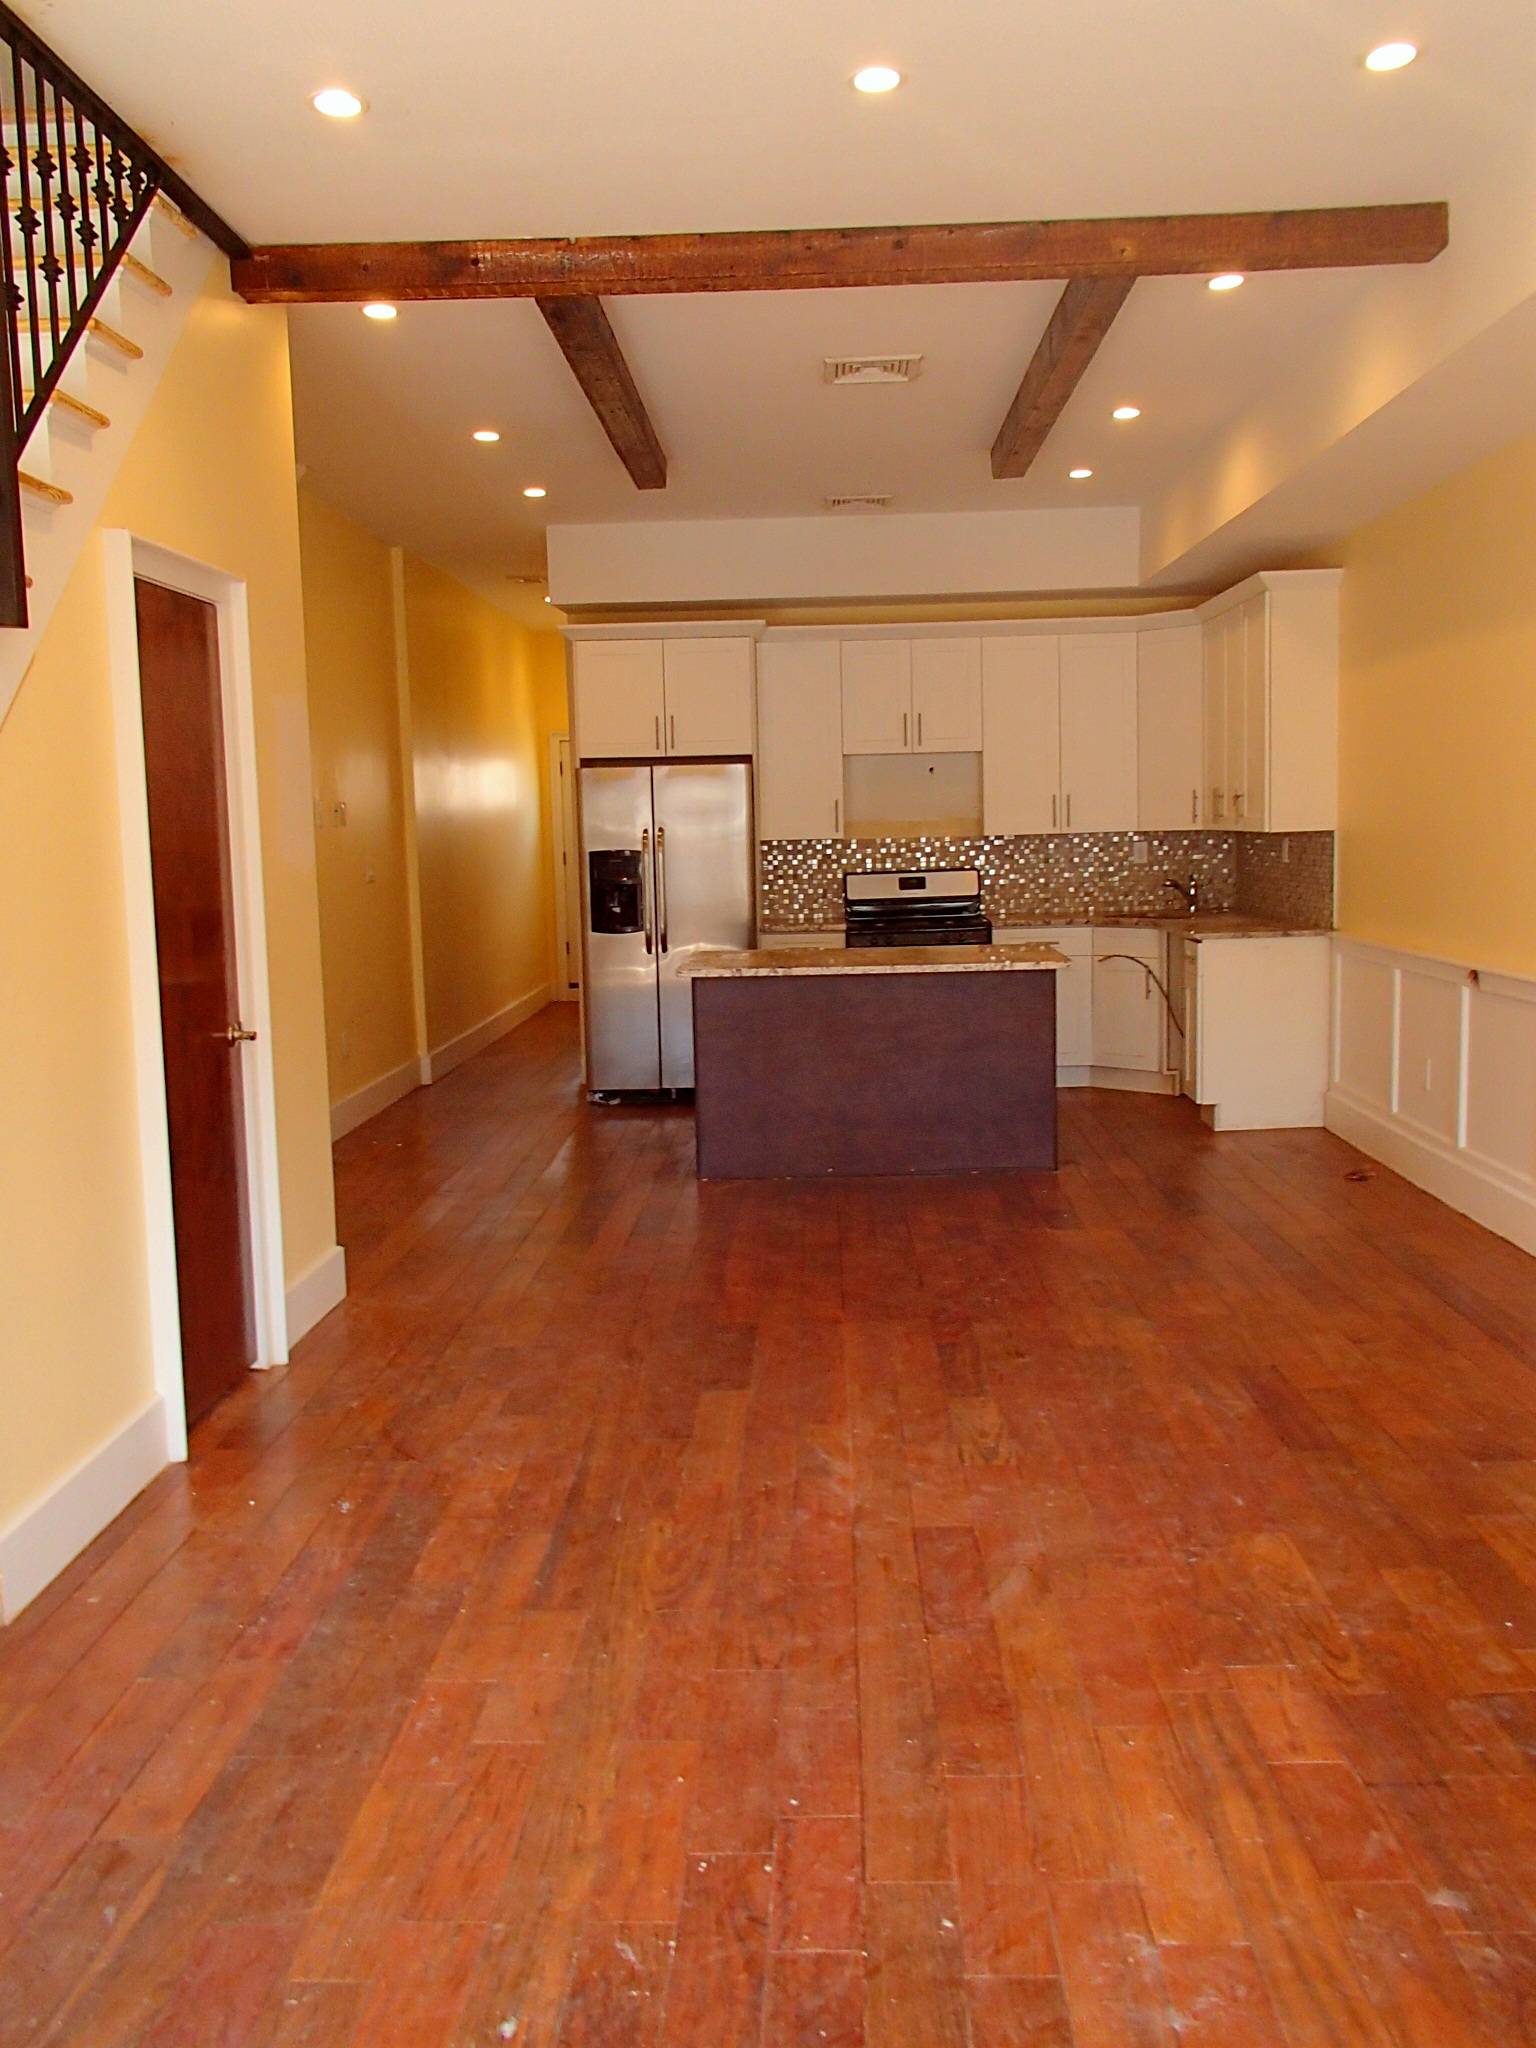 Exquisite Two Family House For Sale in Bedford-Stuyvesant, Brooklyn